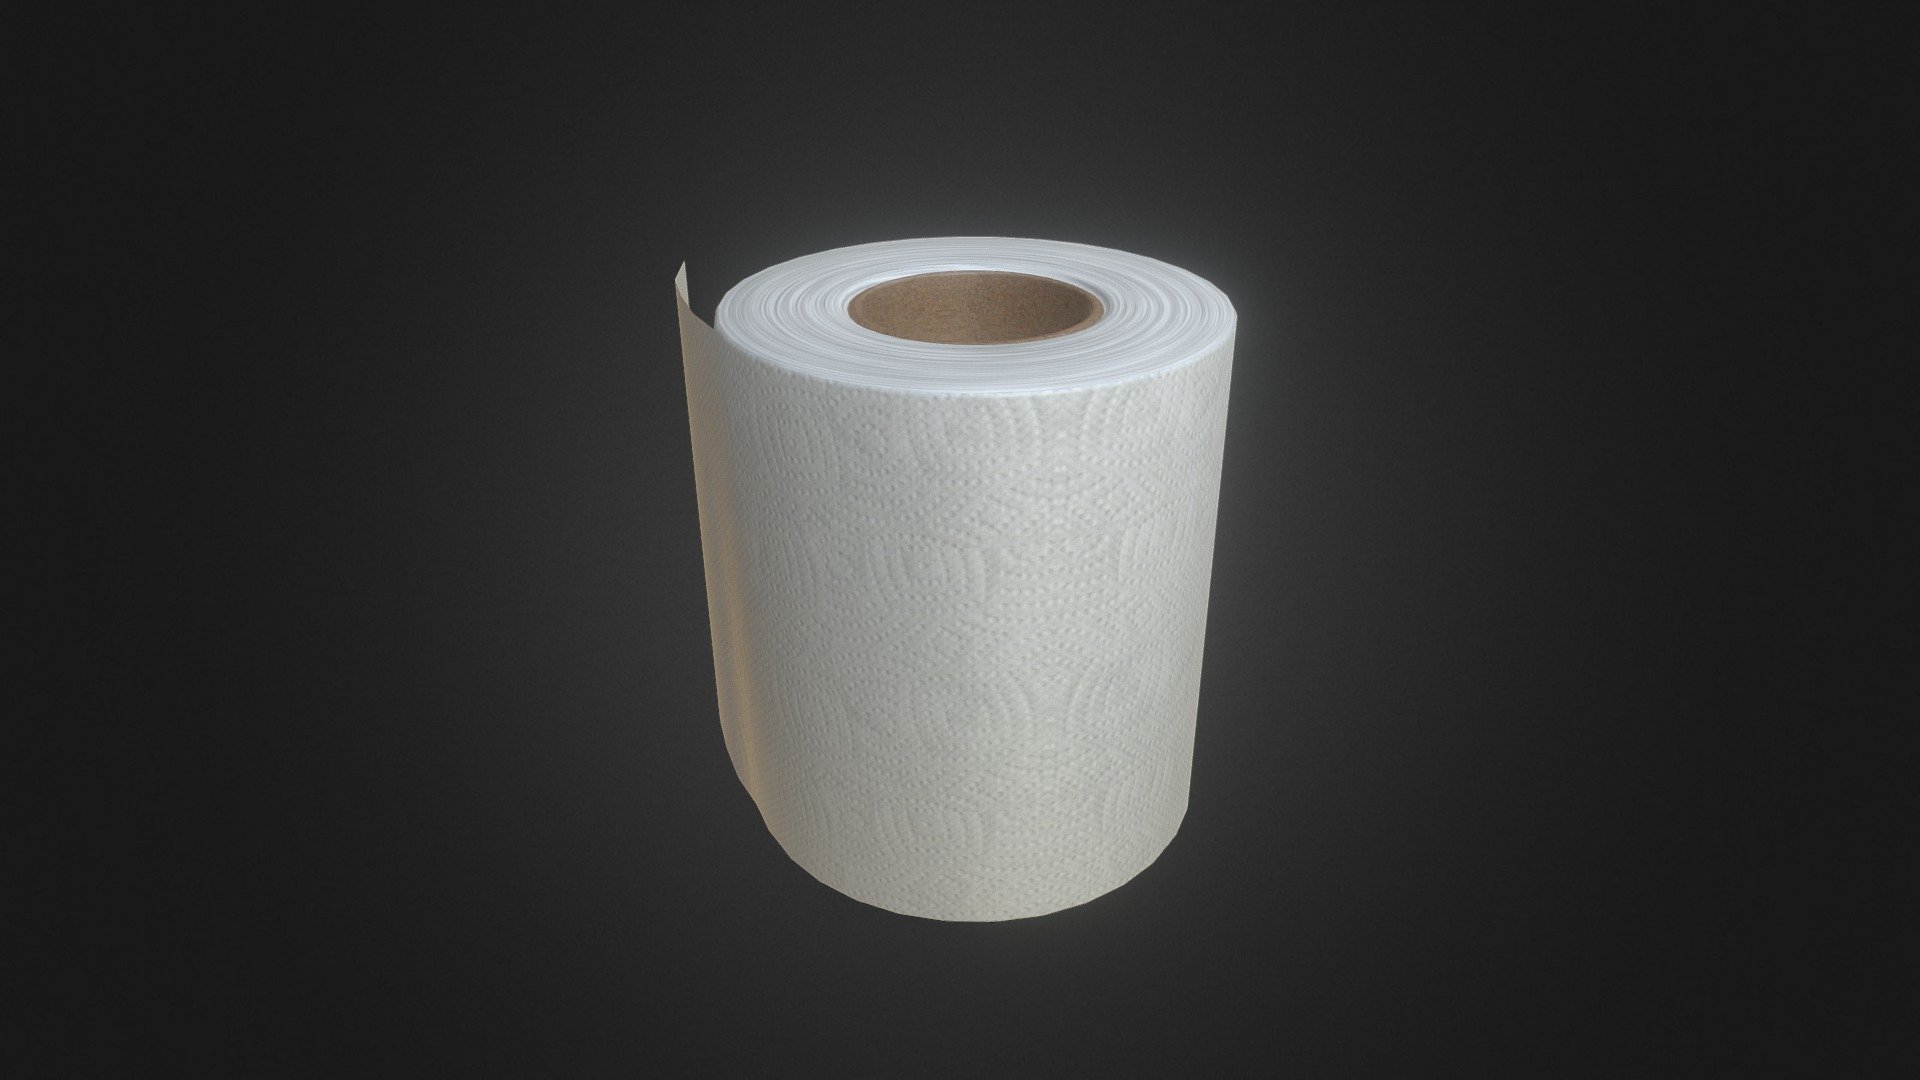 Here lies another toilet paper roll that i created, nothing much but hope you find use for such a simple mesh :P 3d model